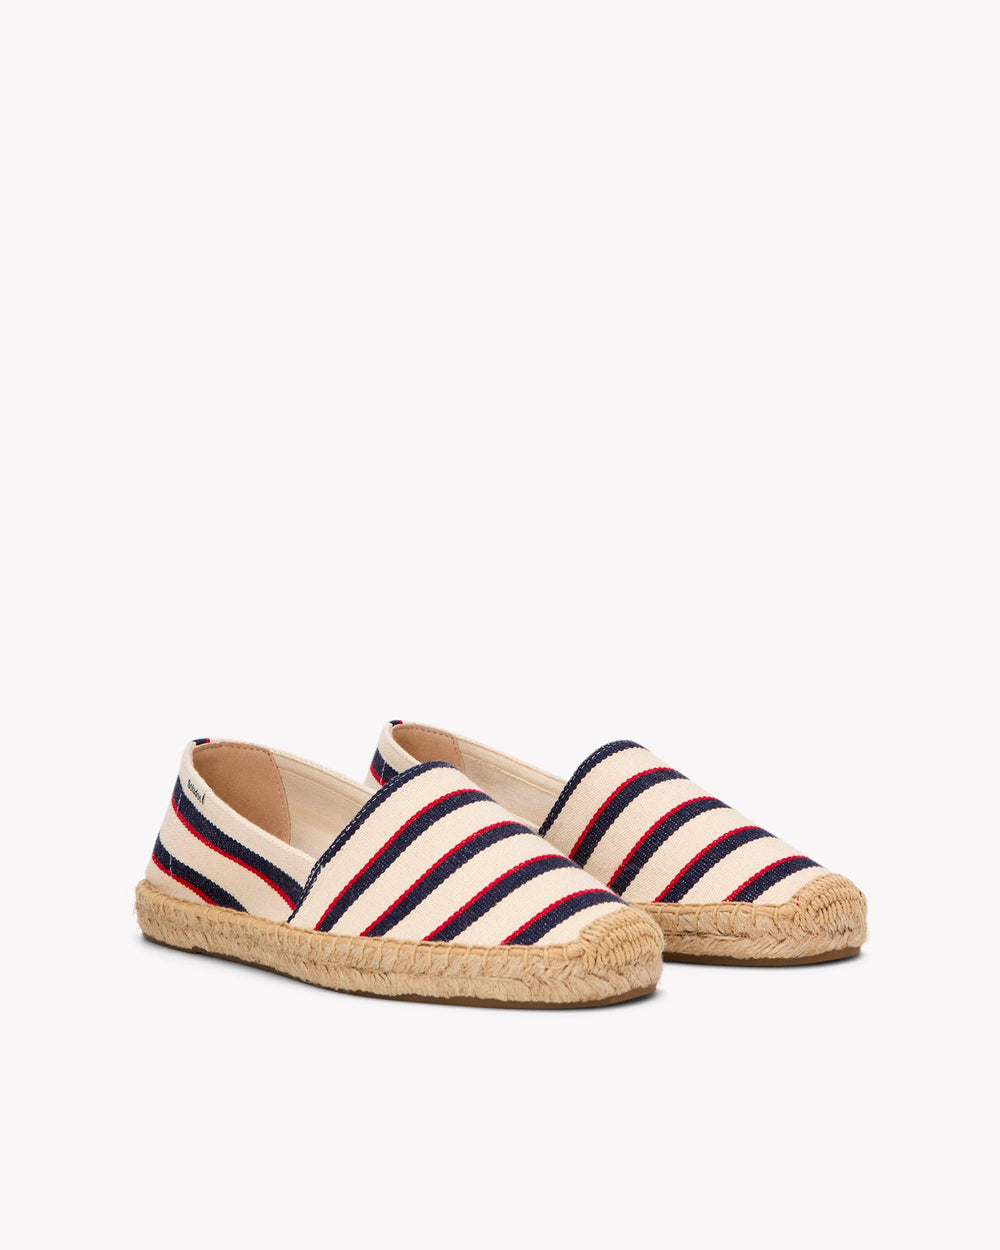 The Original Espadrille - Classic Stripes - Ivory / Navy / Red - Women's